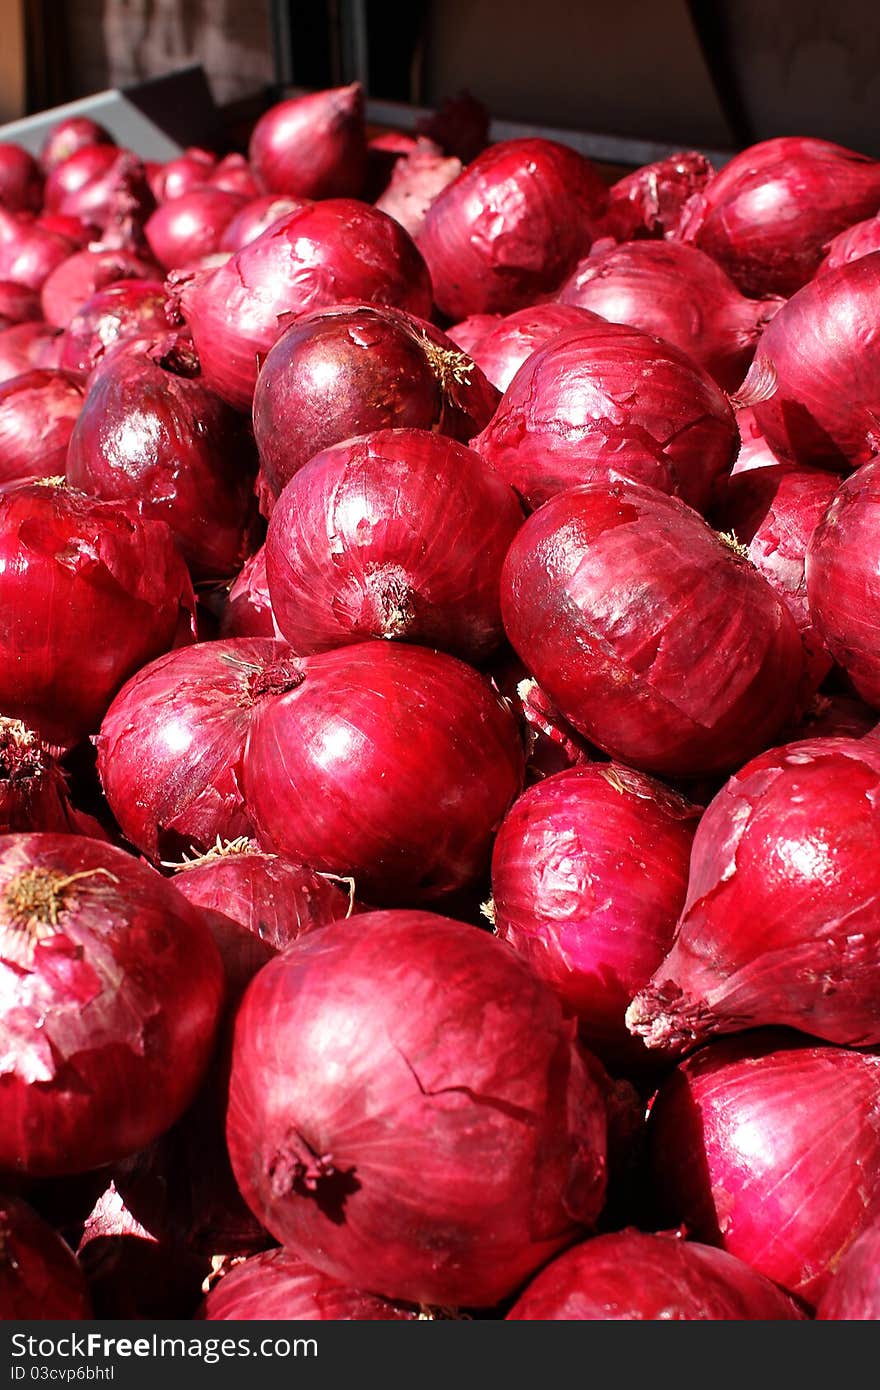 Organic red onions in the marketplace